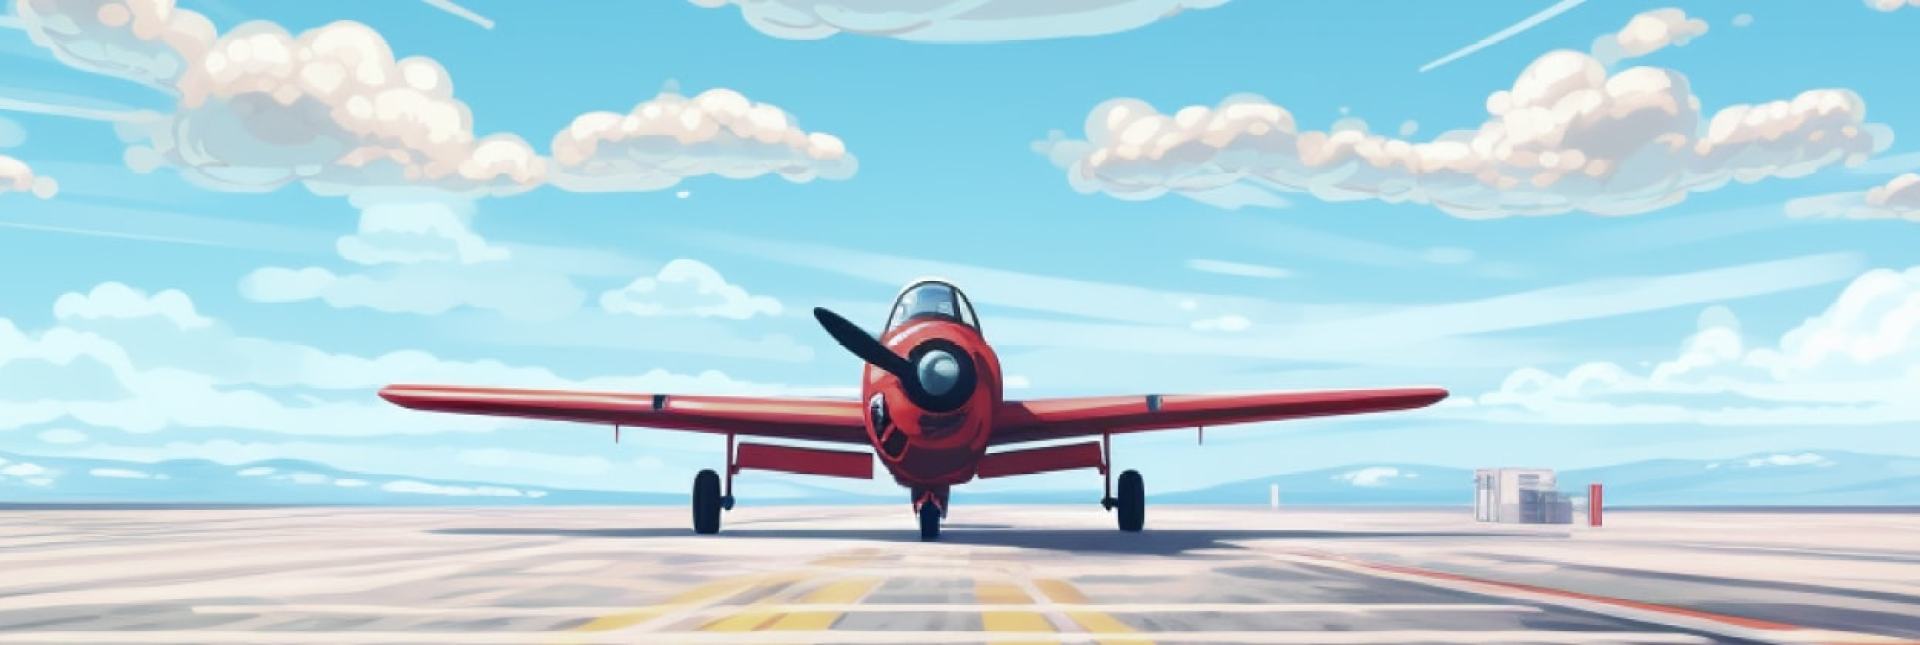 The best aviator game sites